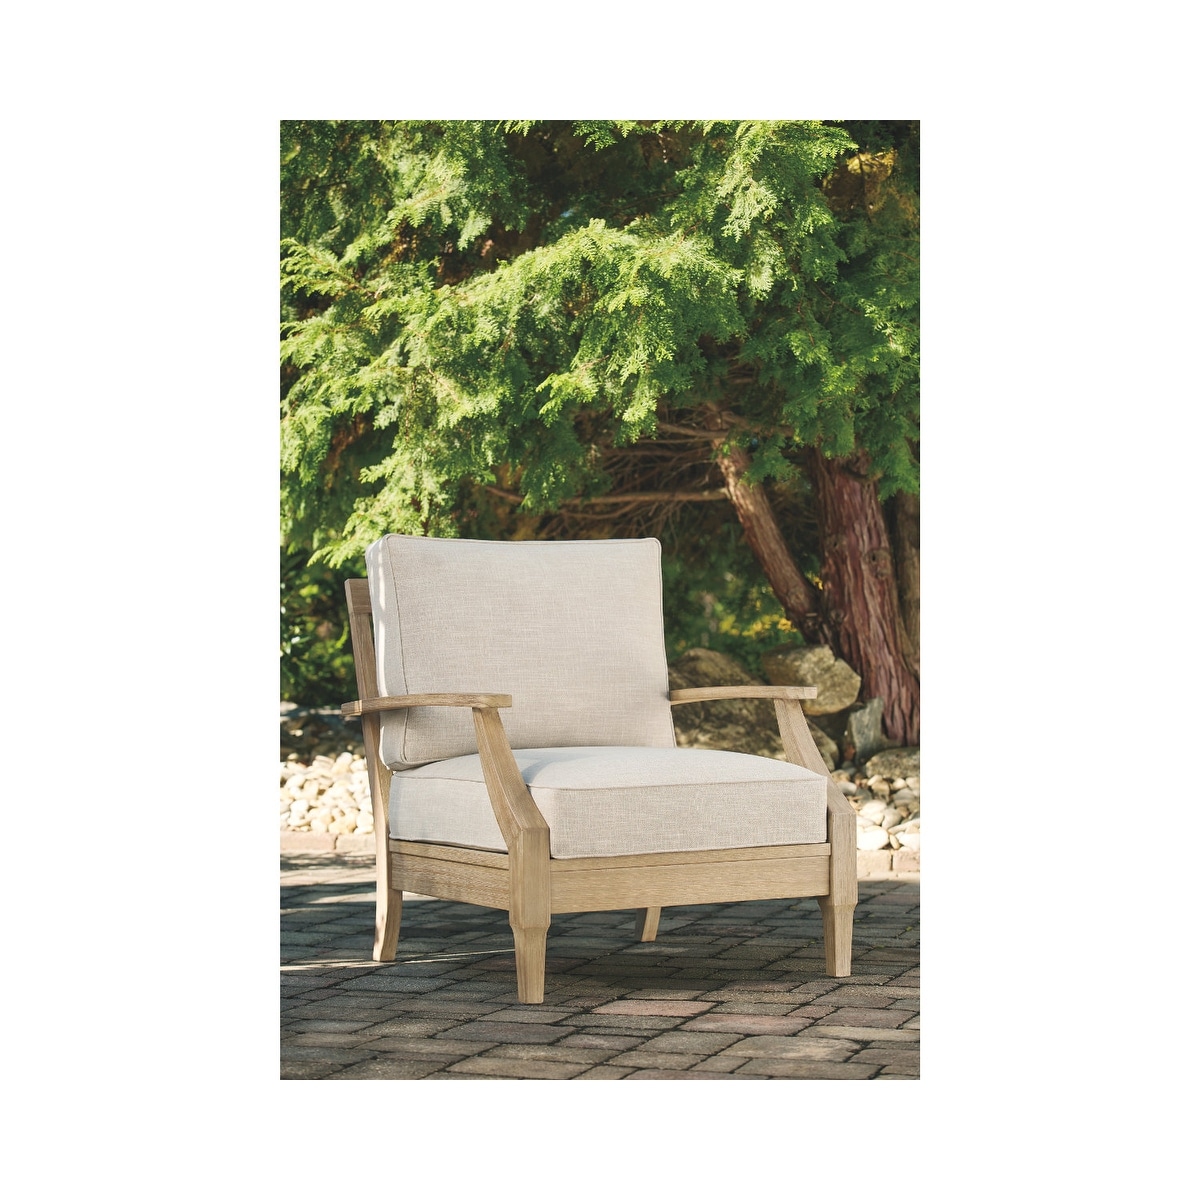 Signature Design By Ashley Clare View Eucalyptus Wood And Cushion Lounge Chair